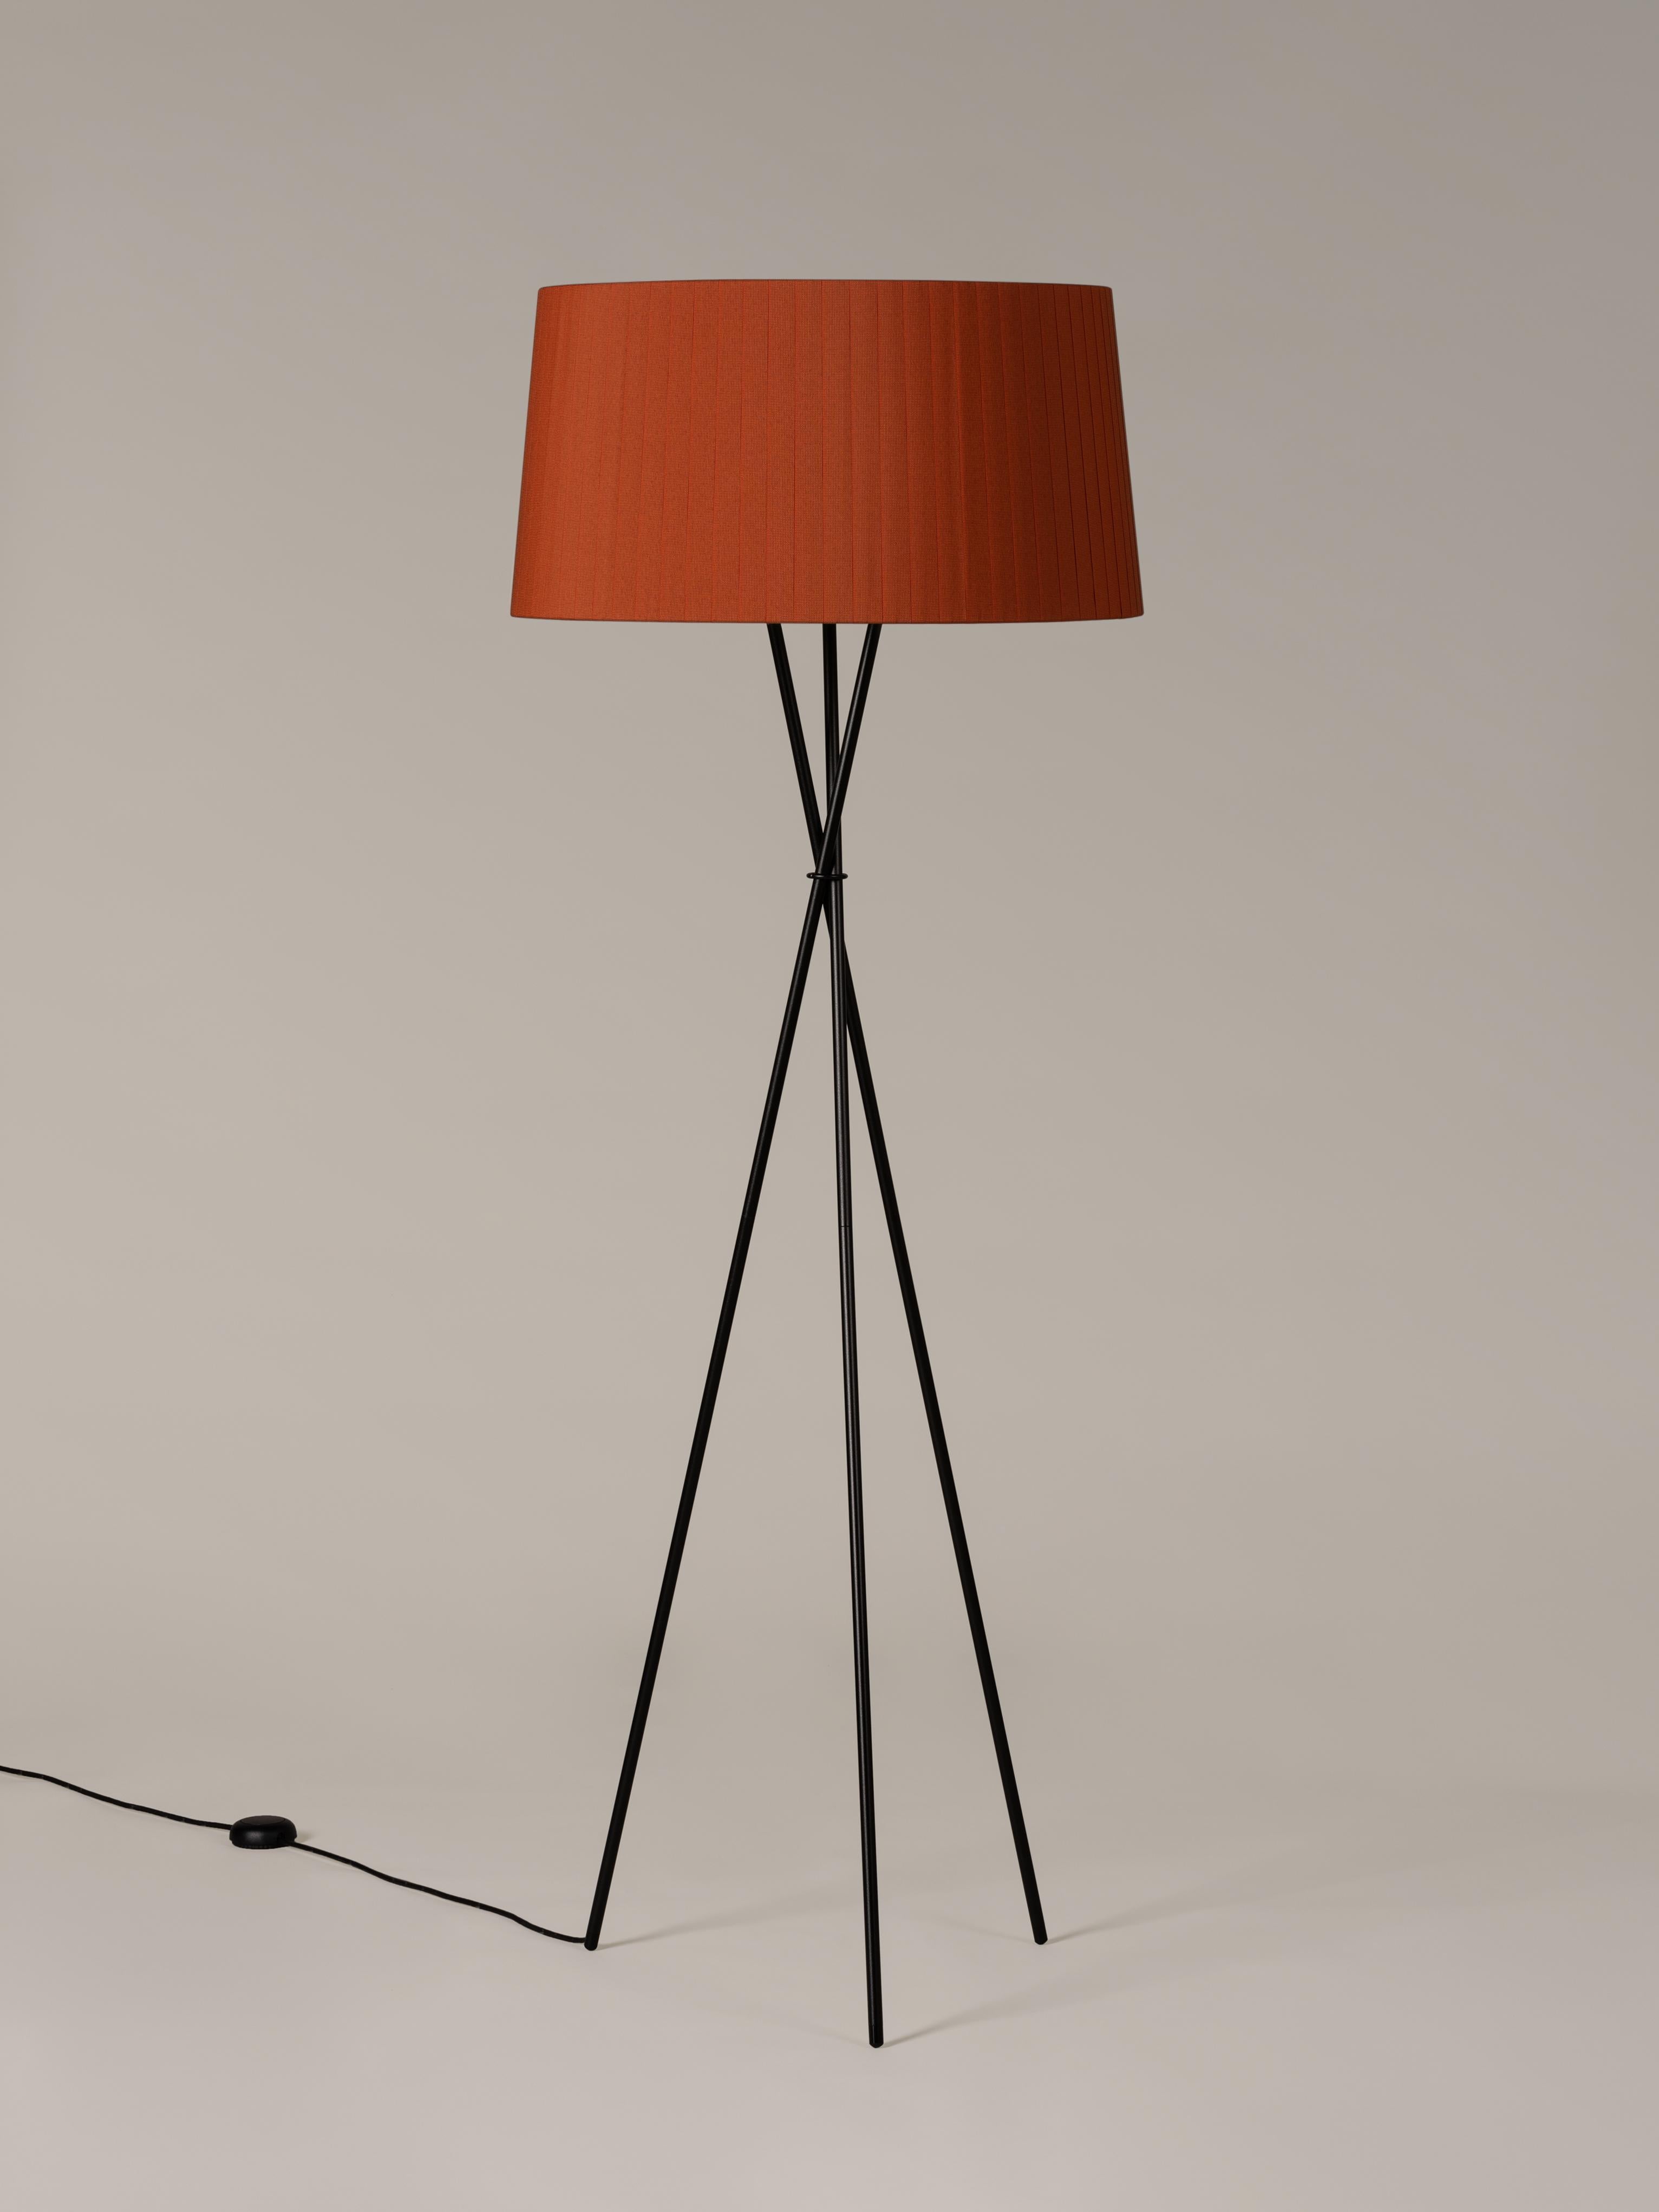 Terracotta Trípode G5 floor lamp by Santa & Cole
Dimensions: D 62 x H 168 cm
Materials: Metal, ribbon.
Available in other colors.

Trípode humanises neutral spaces with its colourful and functional sobriety. The shade is hand ribboned and its